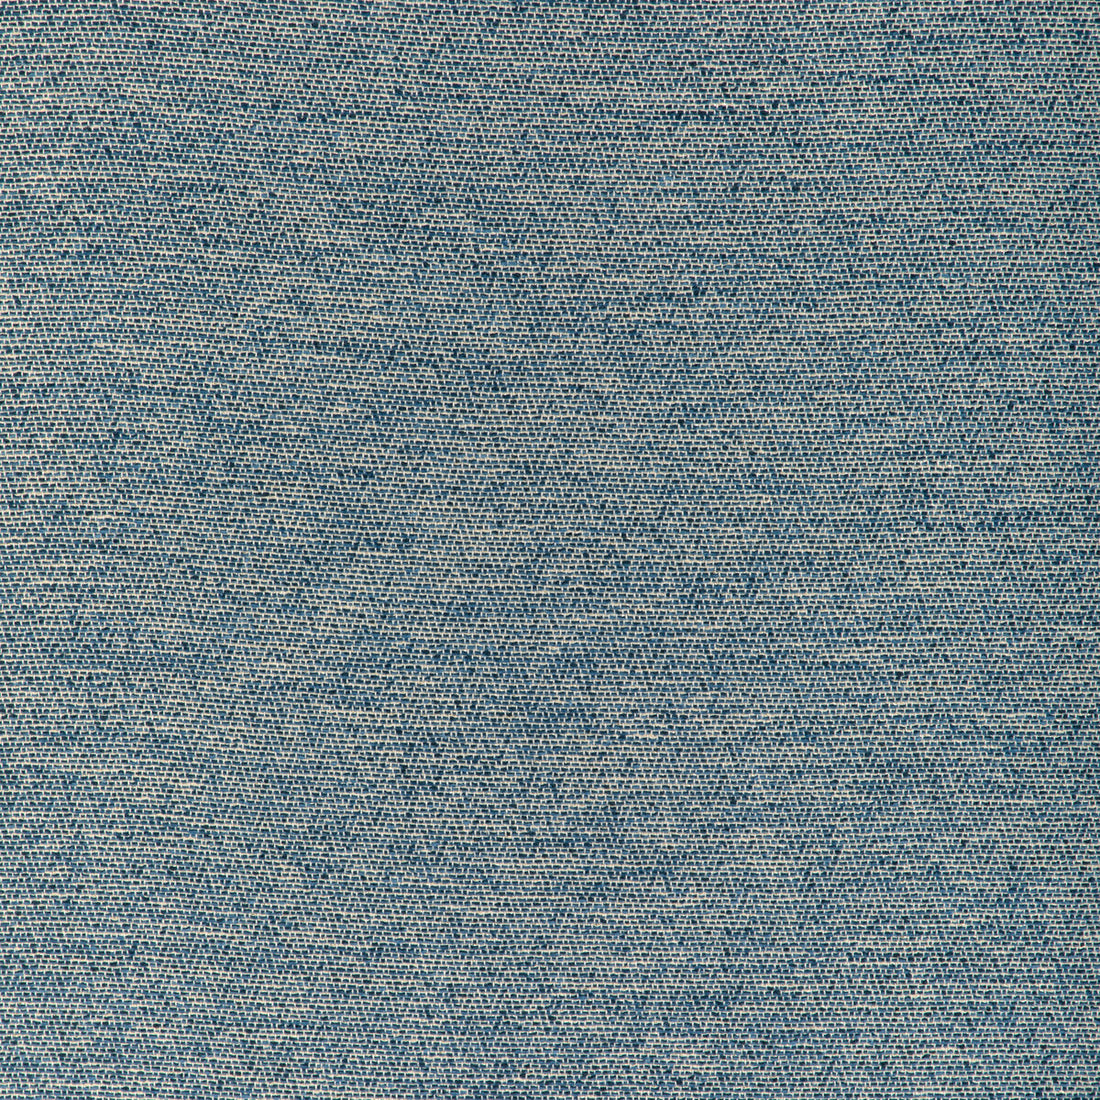 Beauvoir Texture fabric in denim color - pattern 8023153.50.0 - by Brunschwig &amp; Fils in the Chambery Textures IV collection